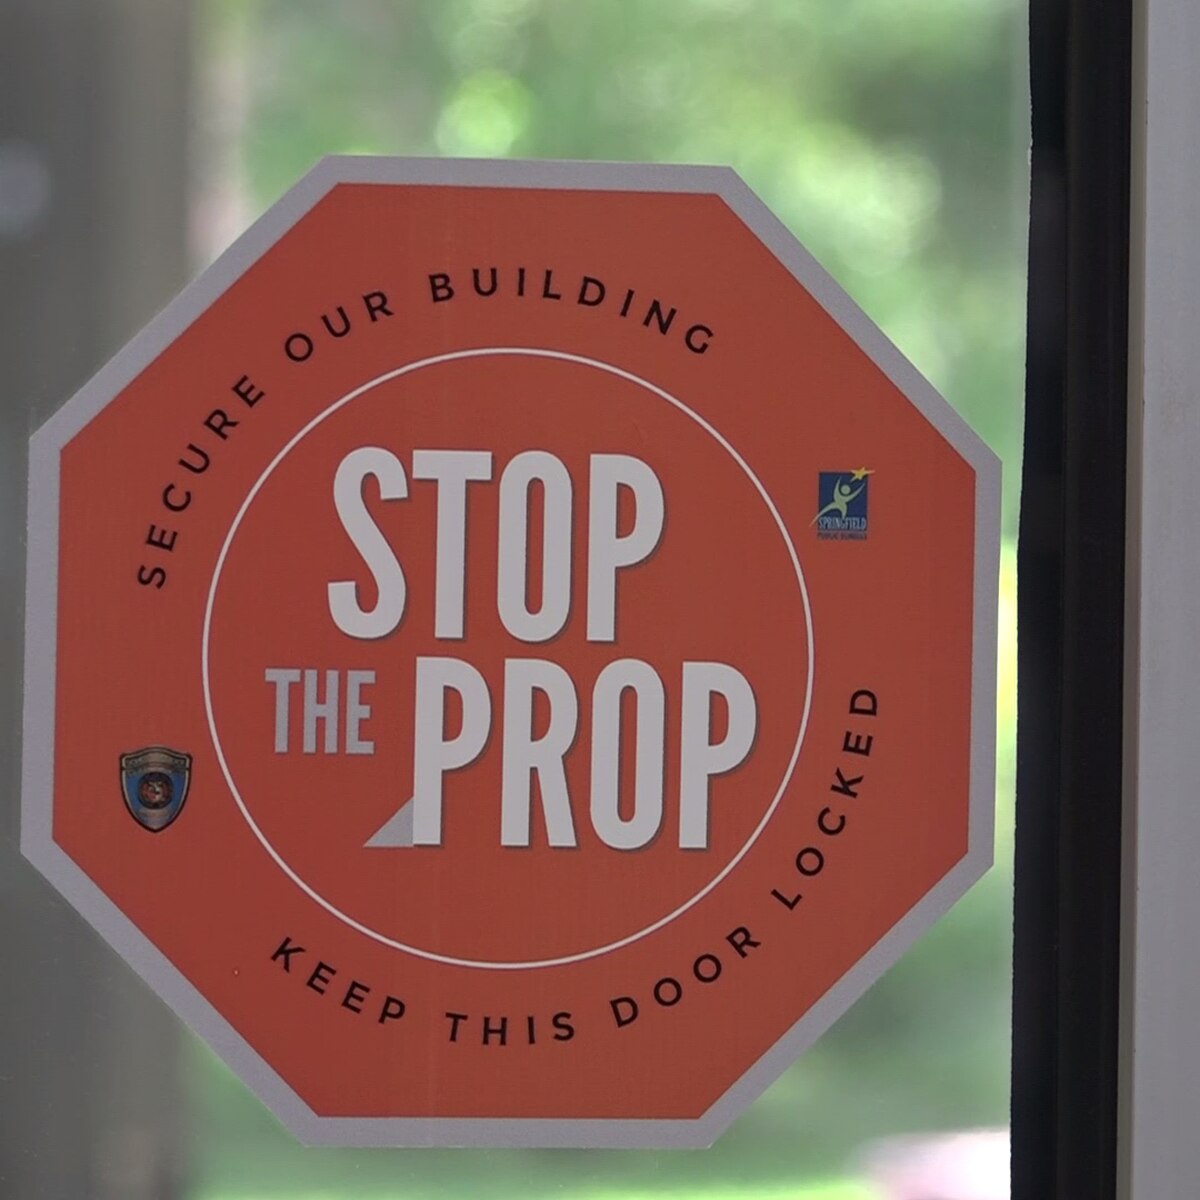 Stop sign that states: STOP THE PROP, Secure Our Building Keep this Door Locked